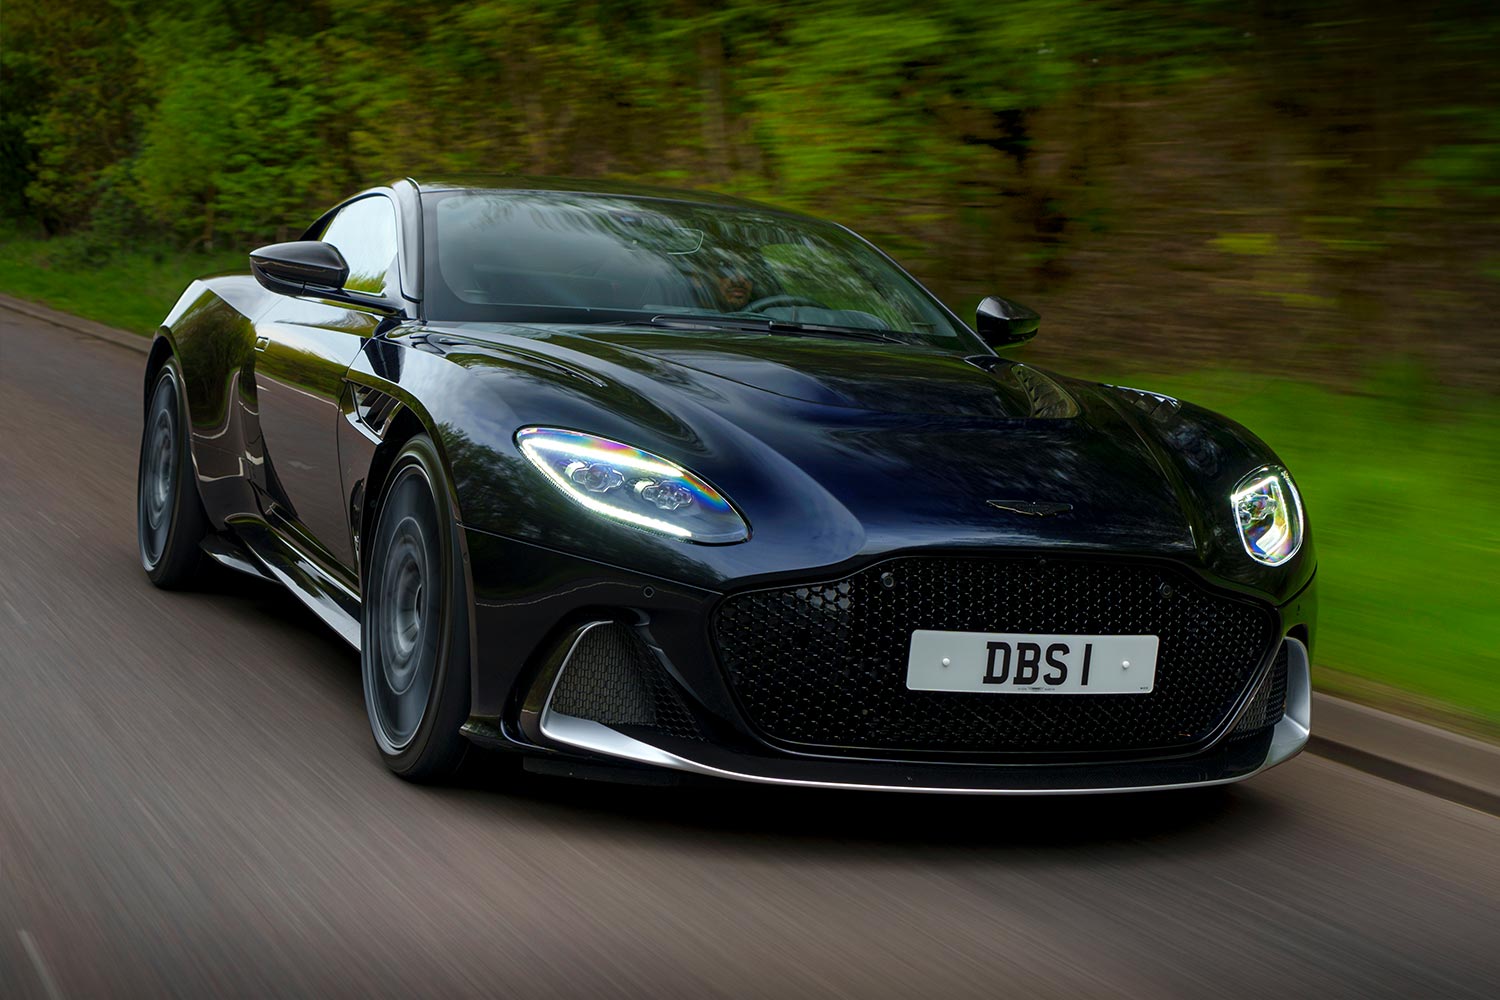 The Aston Martin DBS 770 Ultimate Coupe speeding down the road